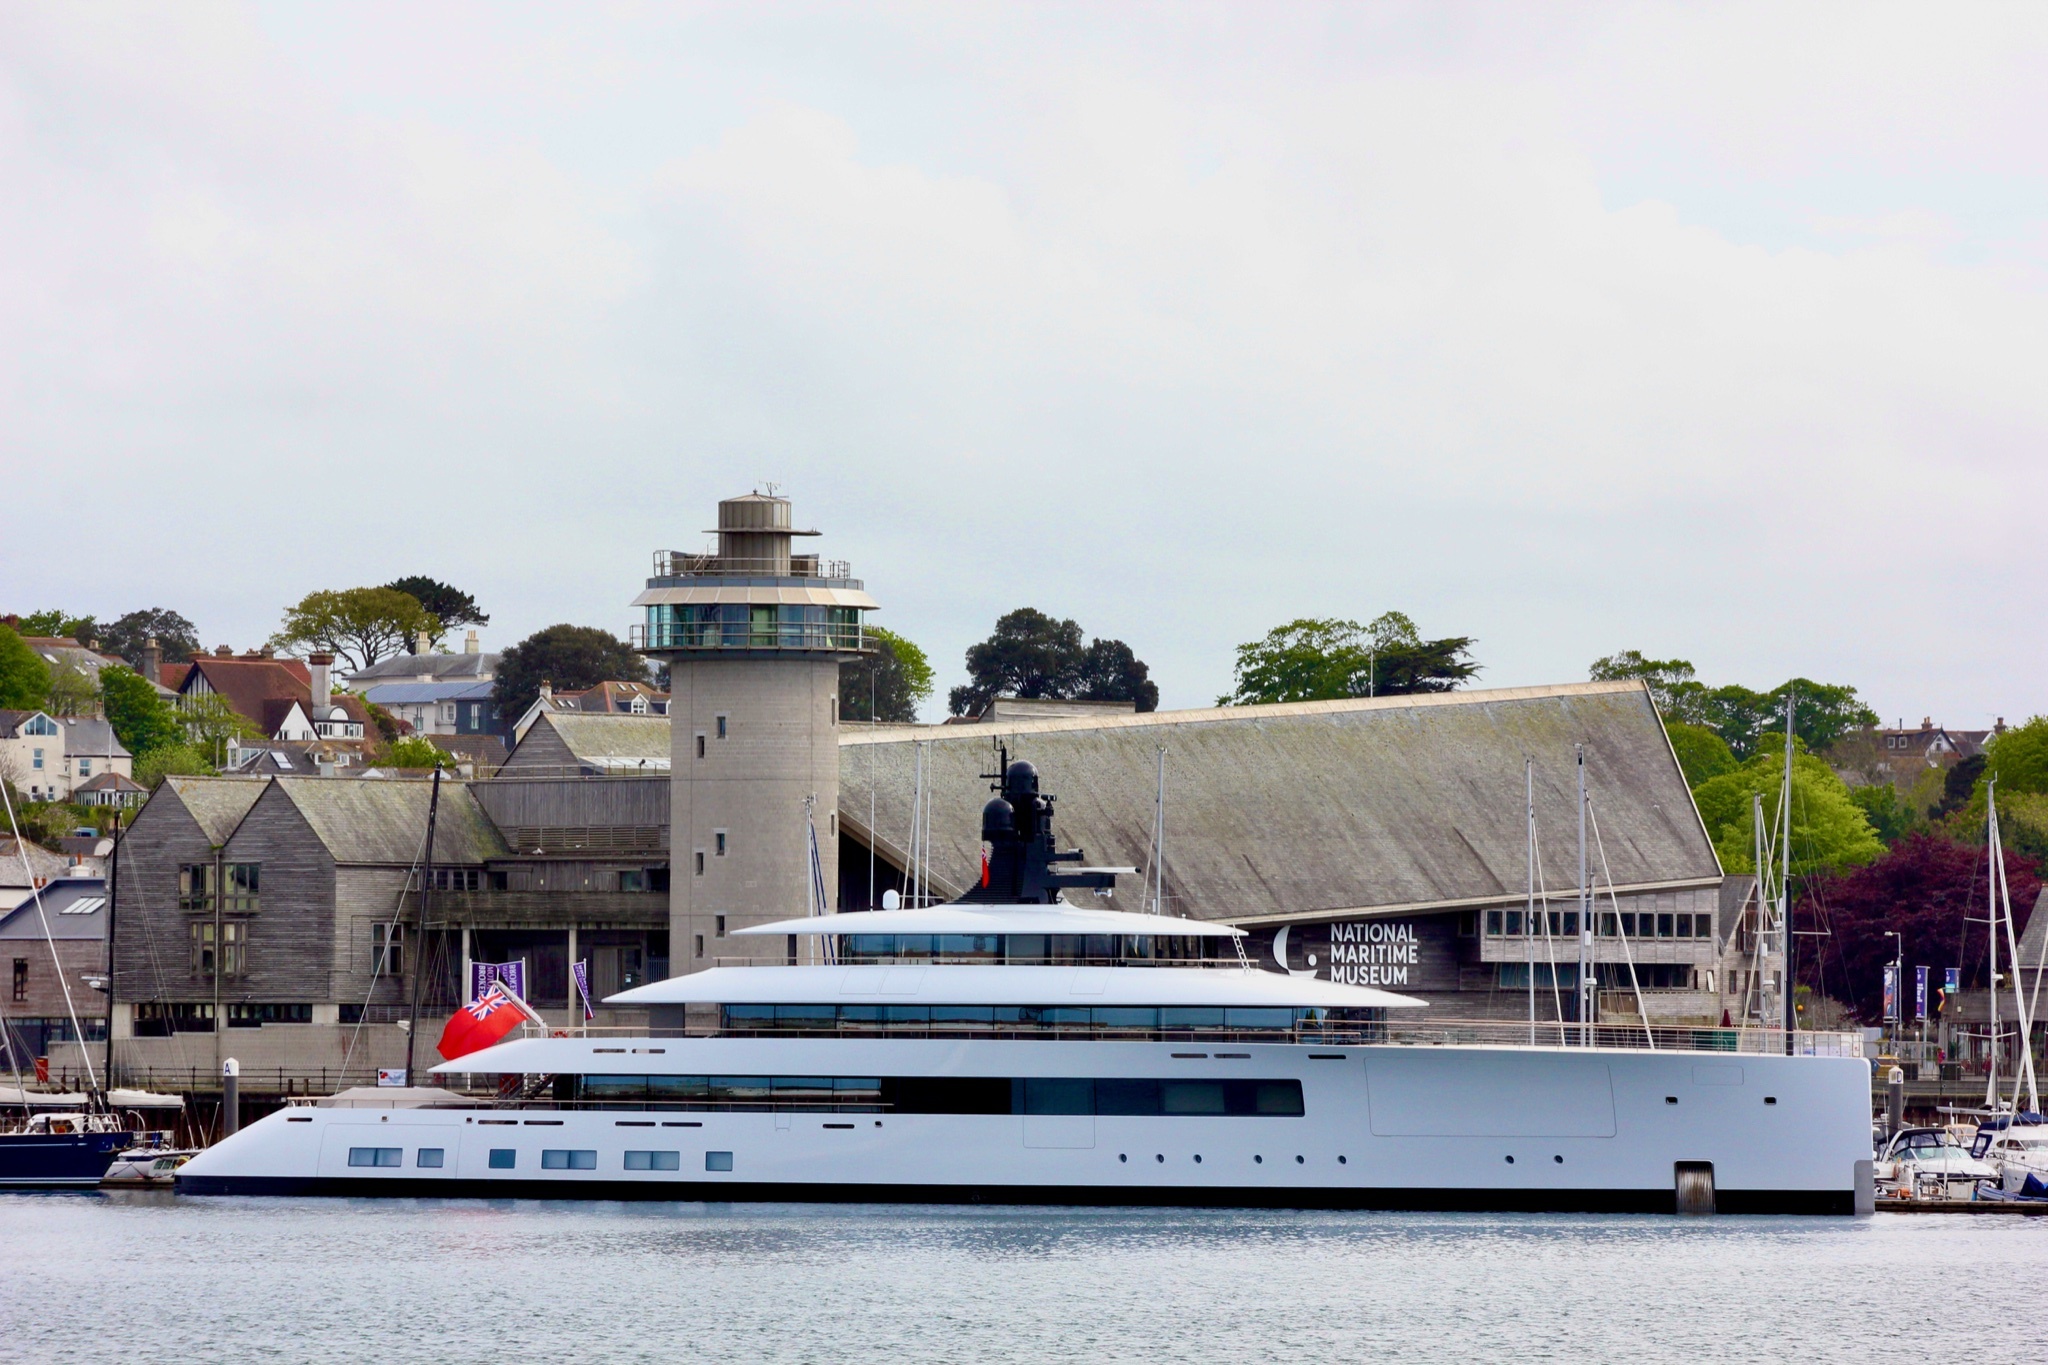 The Superyacht Pi moored up in Falmouth. Picture David Barnicoat